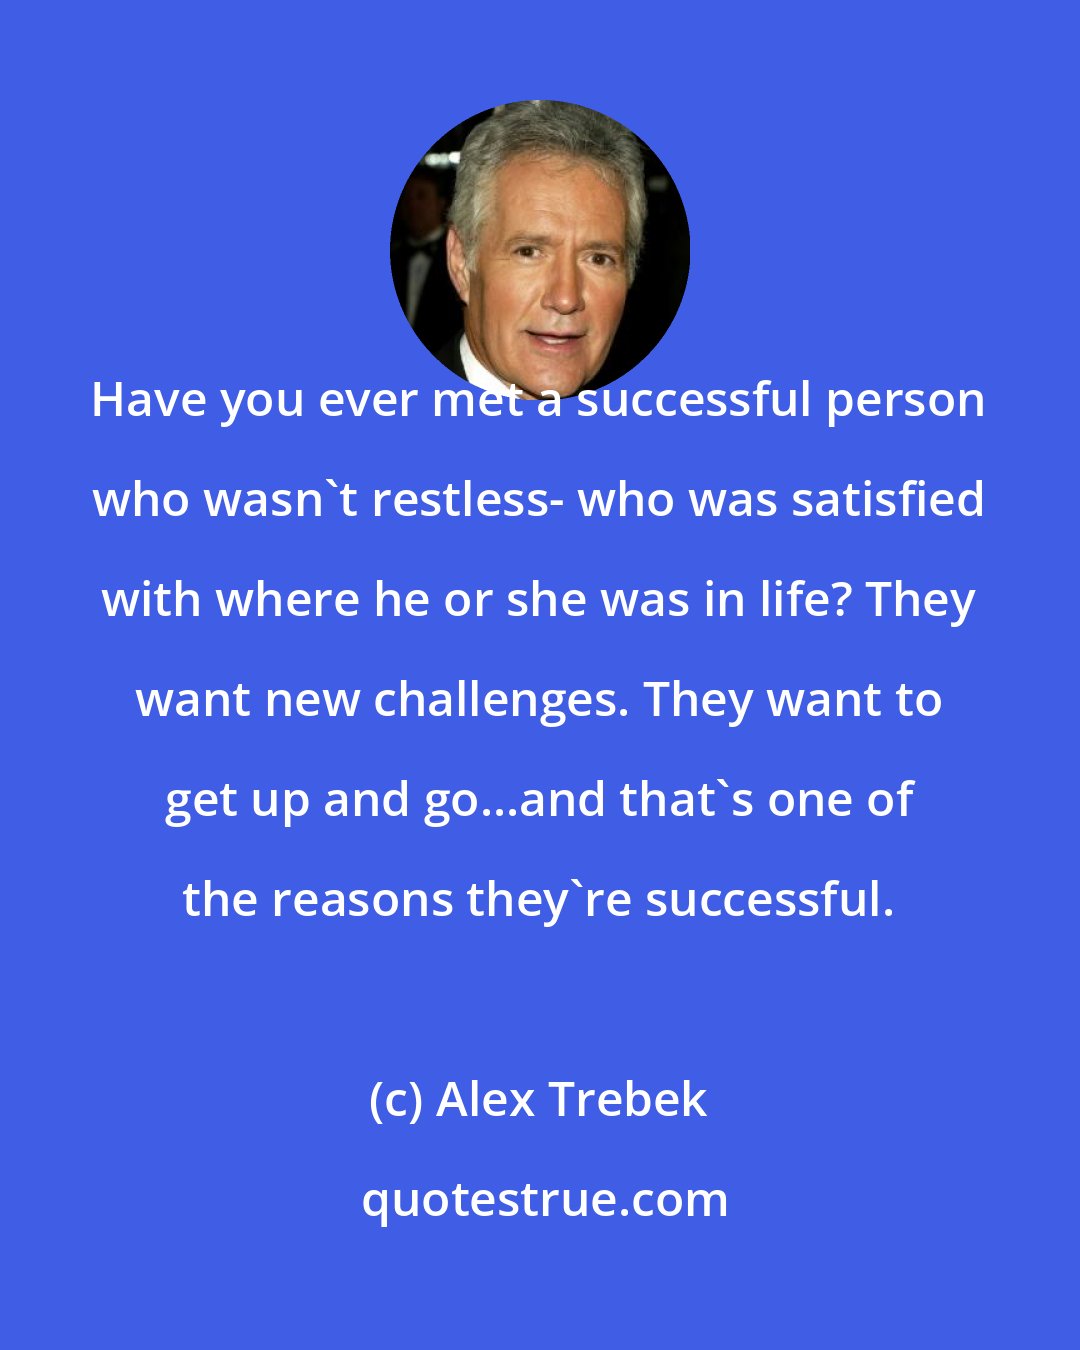 Alex Trebek: Have you ever met a successful person who wasn't restless- who was satisfied with where he or she was in life? They want new challenges. They want to get up and go...and that's one of the reasons they're successful.